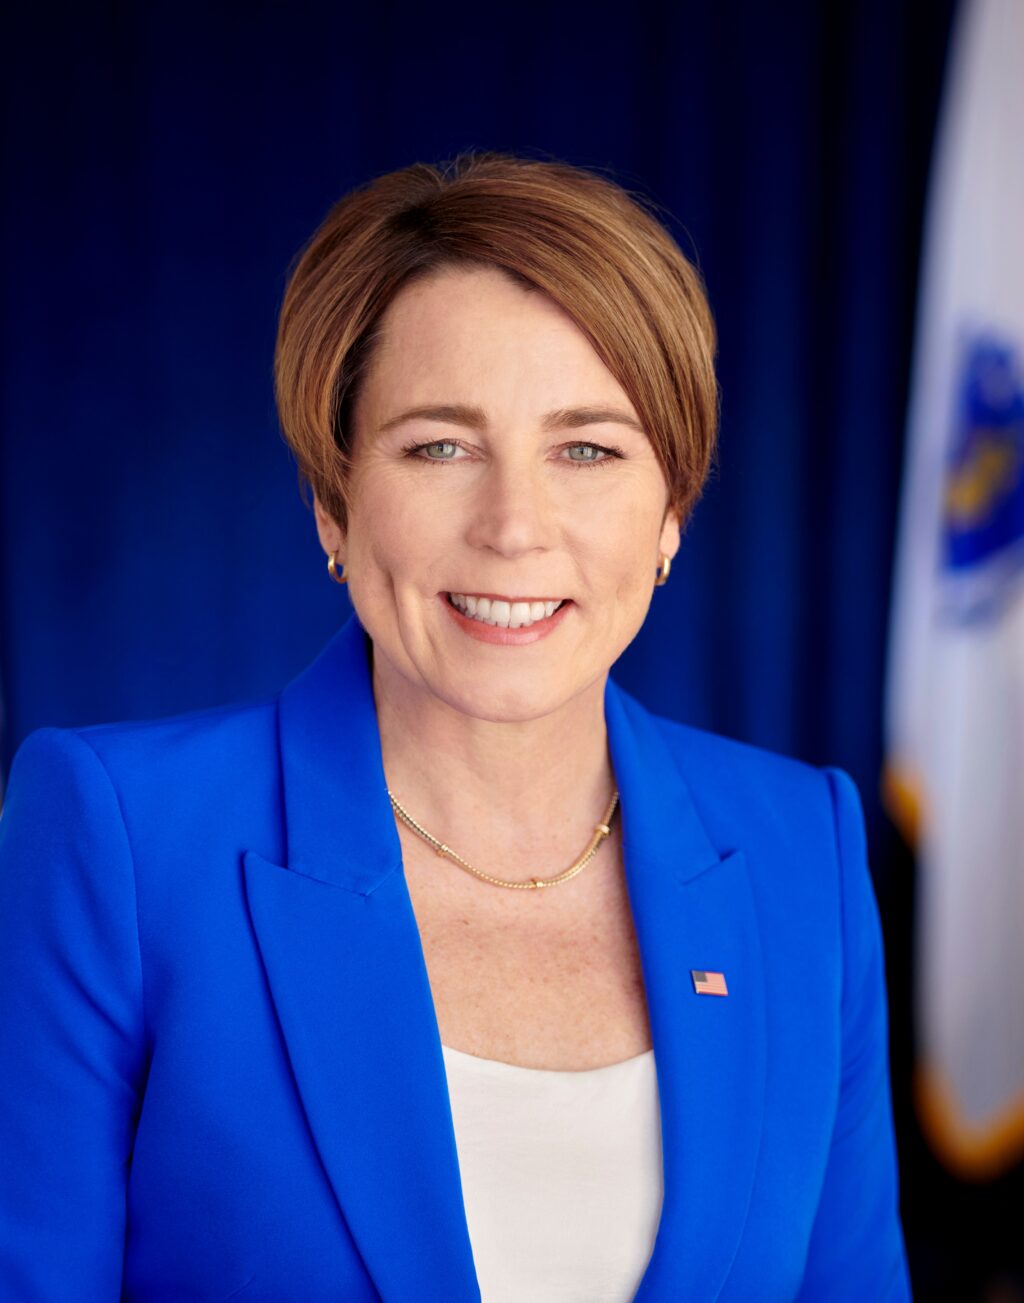 The headshot of Maura Healey, MA governor and speaker at ACP's Offshore WINDPOWER conference 2023.